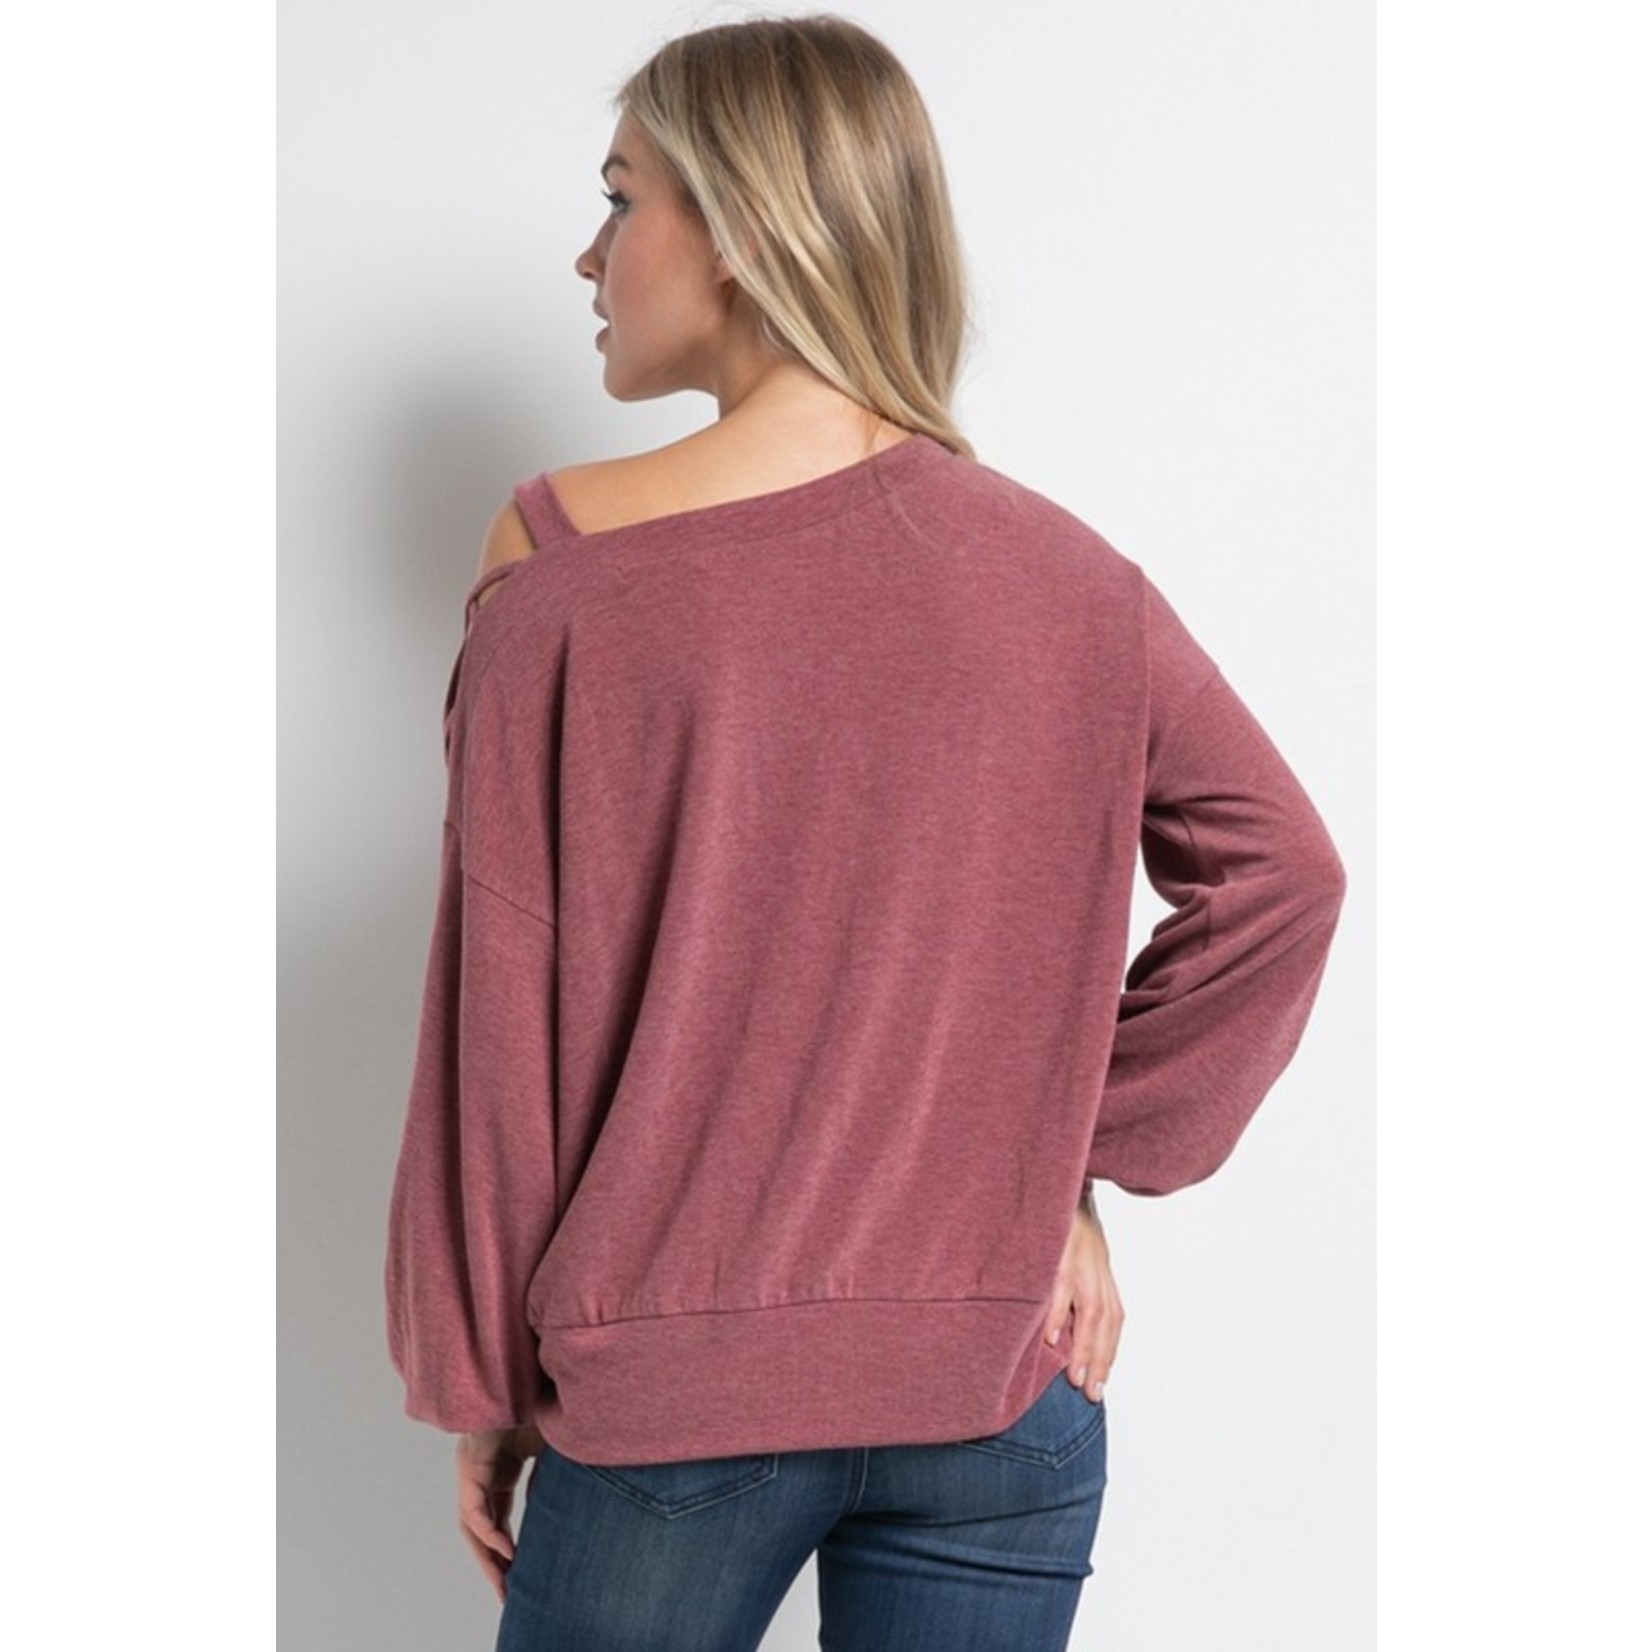 The Phoebe Top